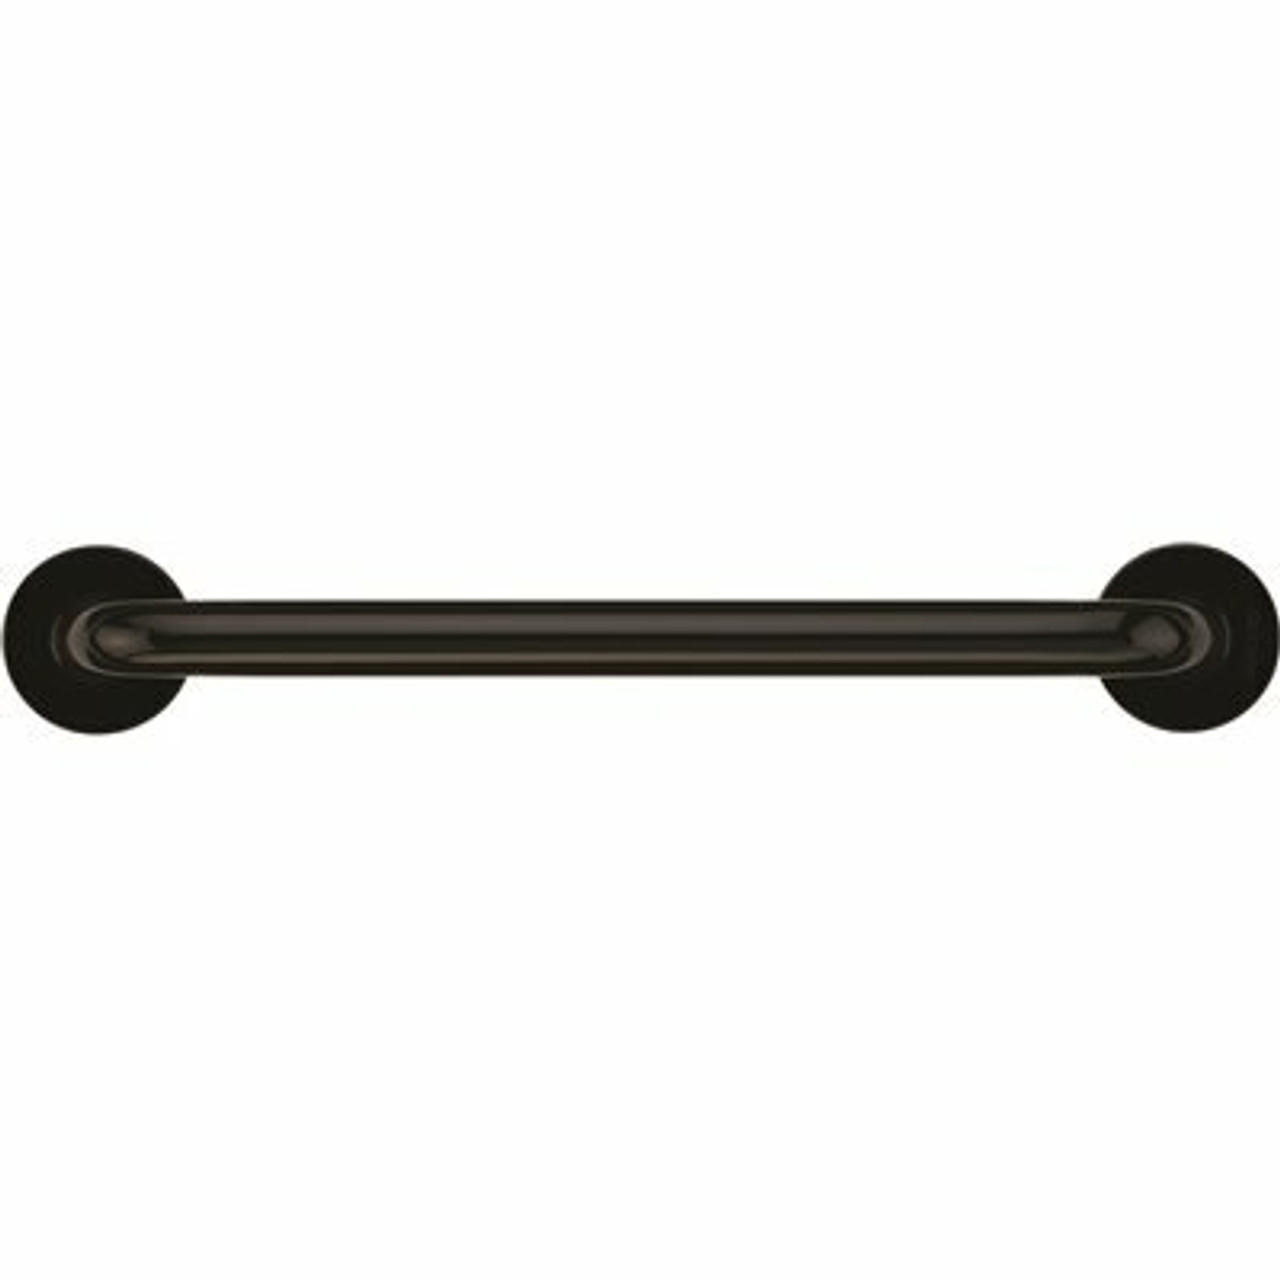 Ponte Giulio Usa 12 In. Contractor Antimicrobial Vinyl Coated Grab Bar In Black